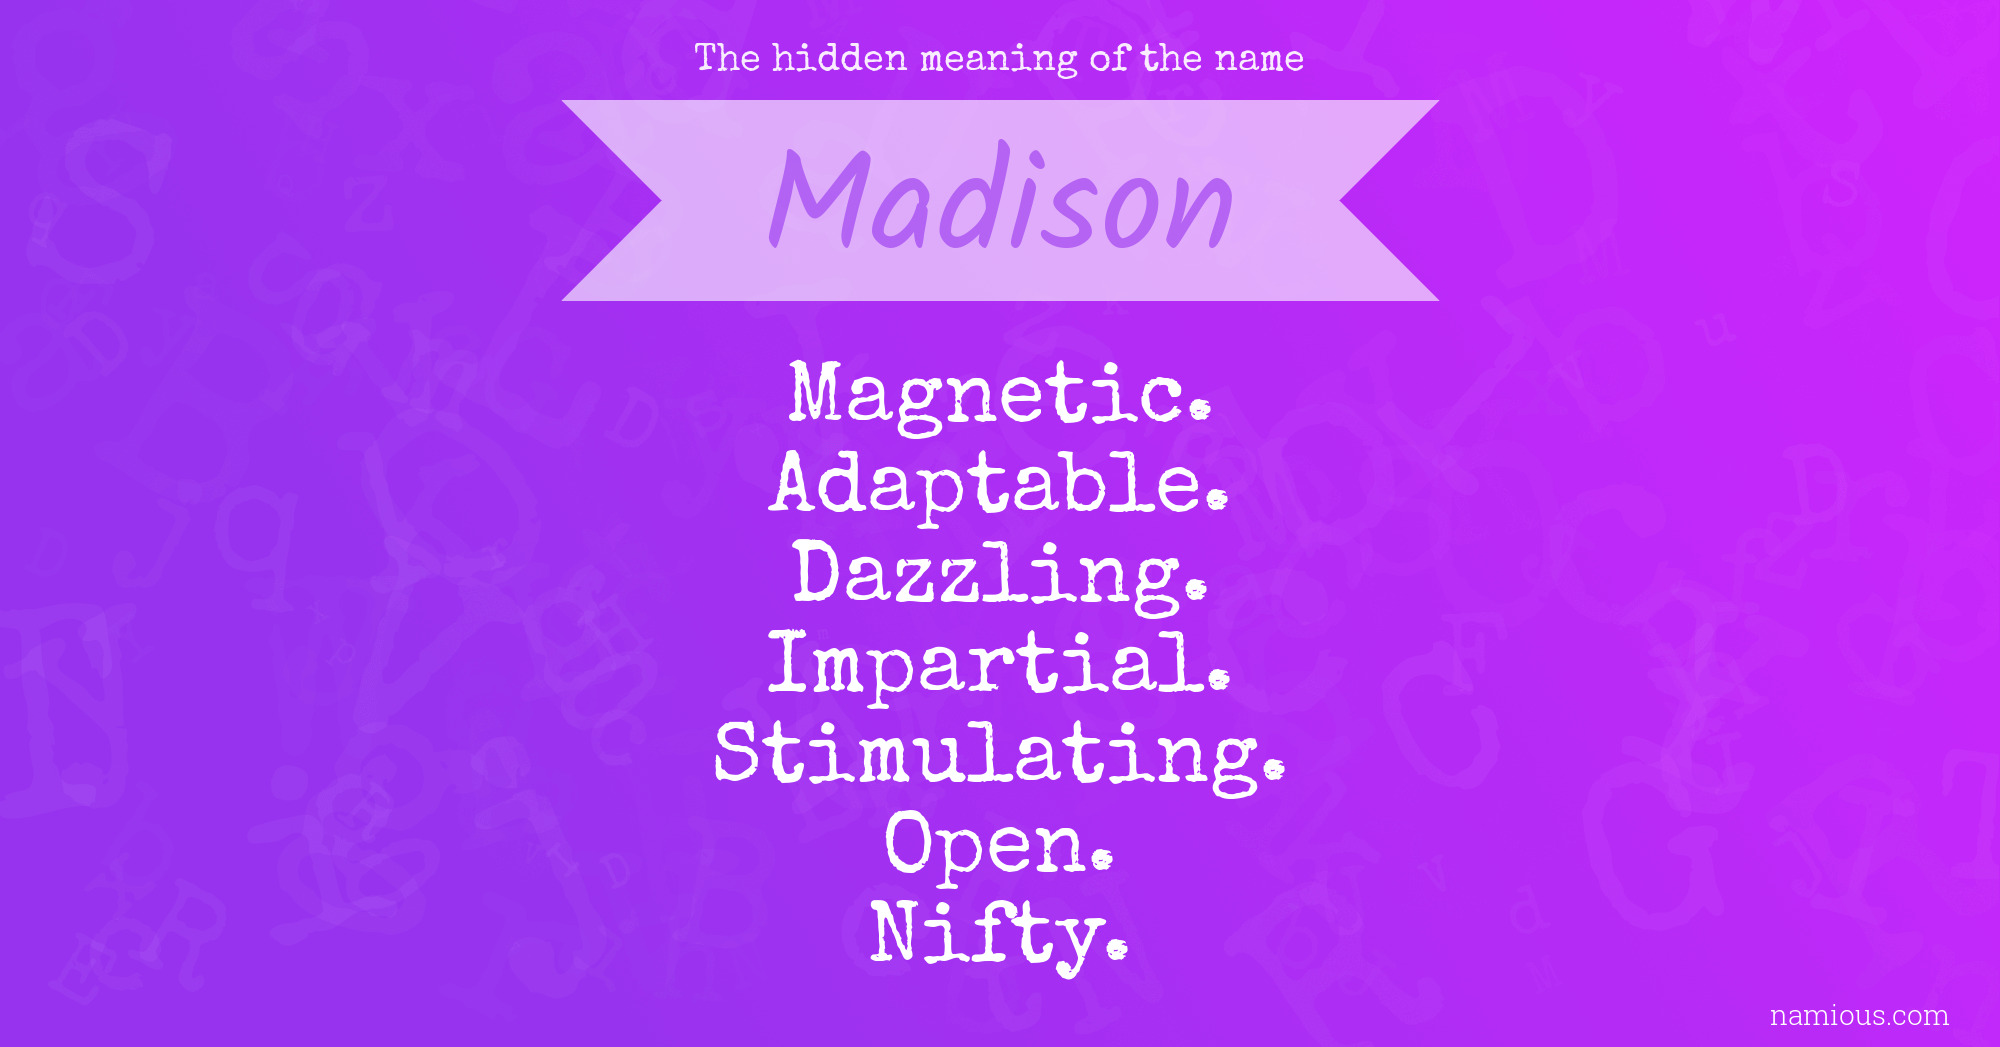 The hidden meaning of the name Madison